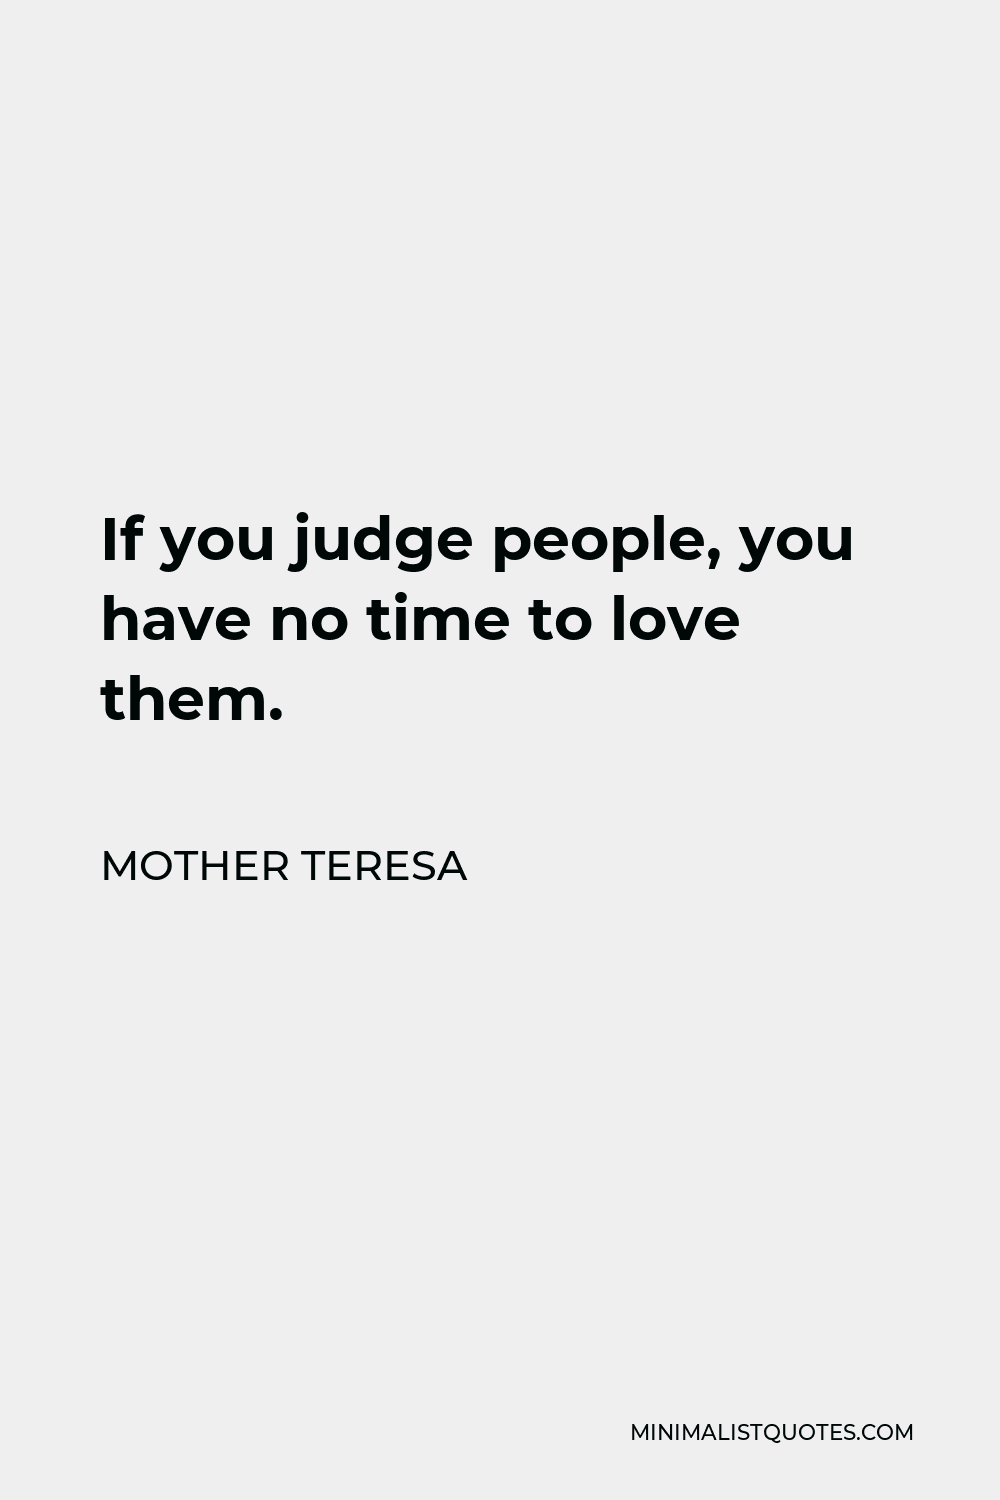 Mother Teresa Quote - If you judge people, you have no time to love them.